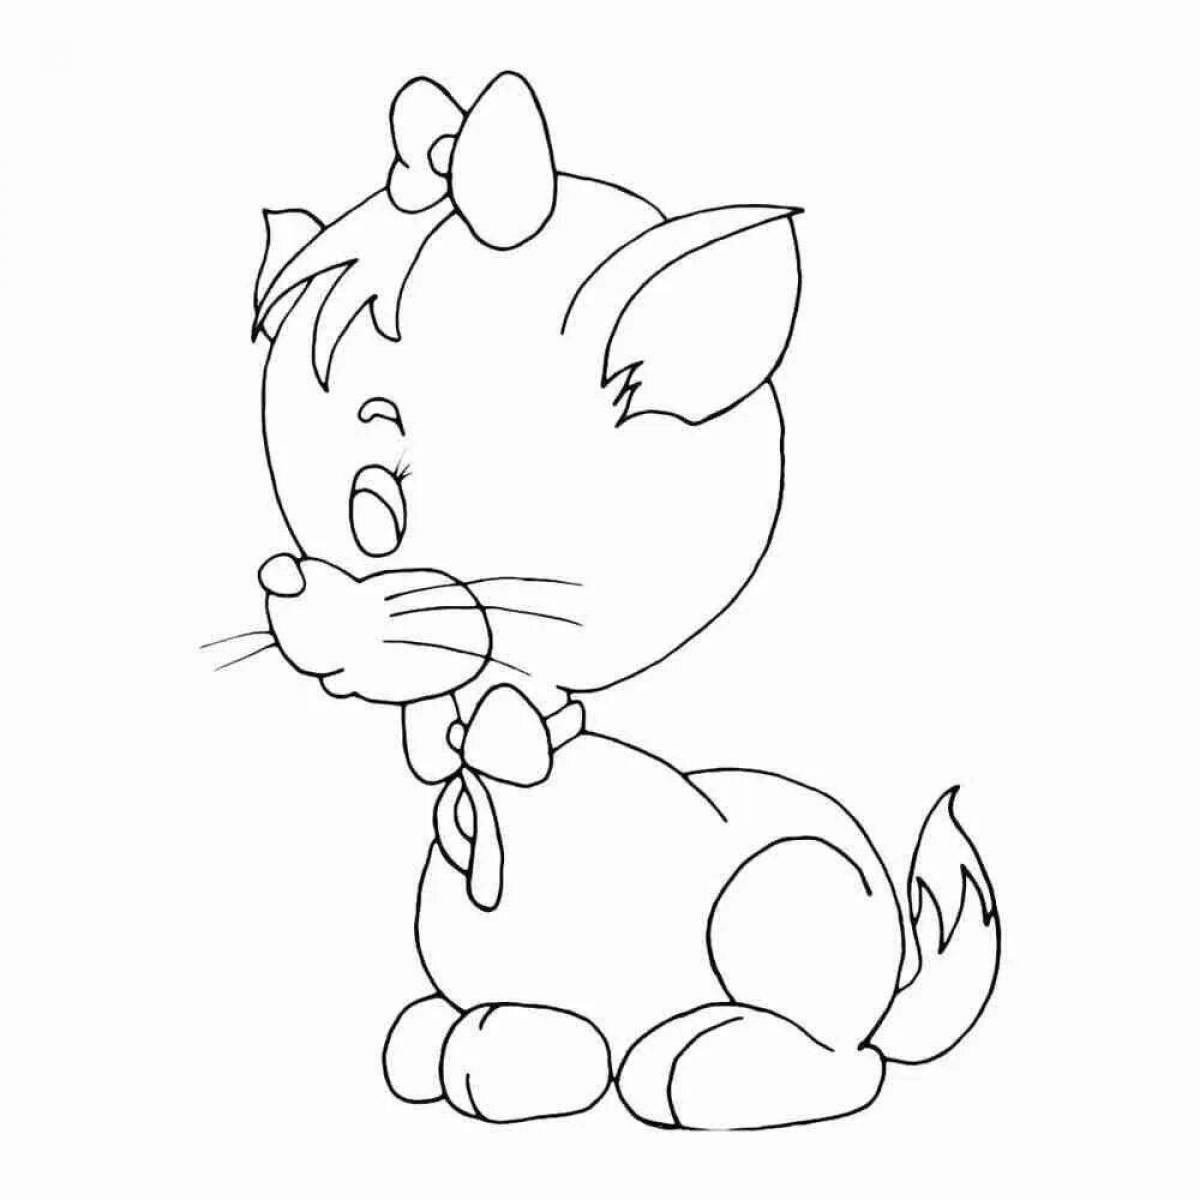 Cute 7 year old kitten coloring book